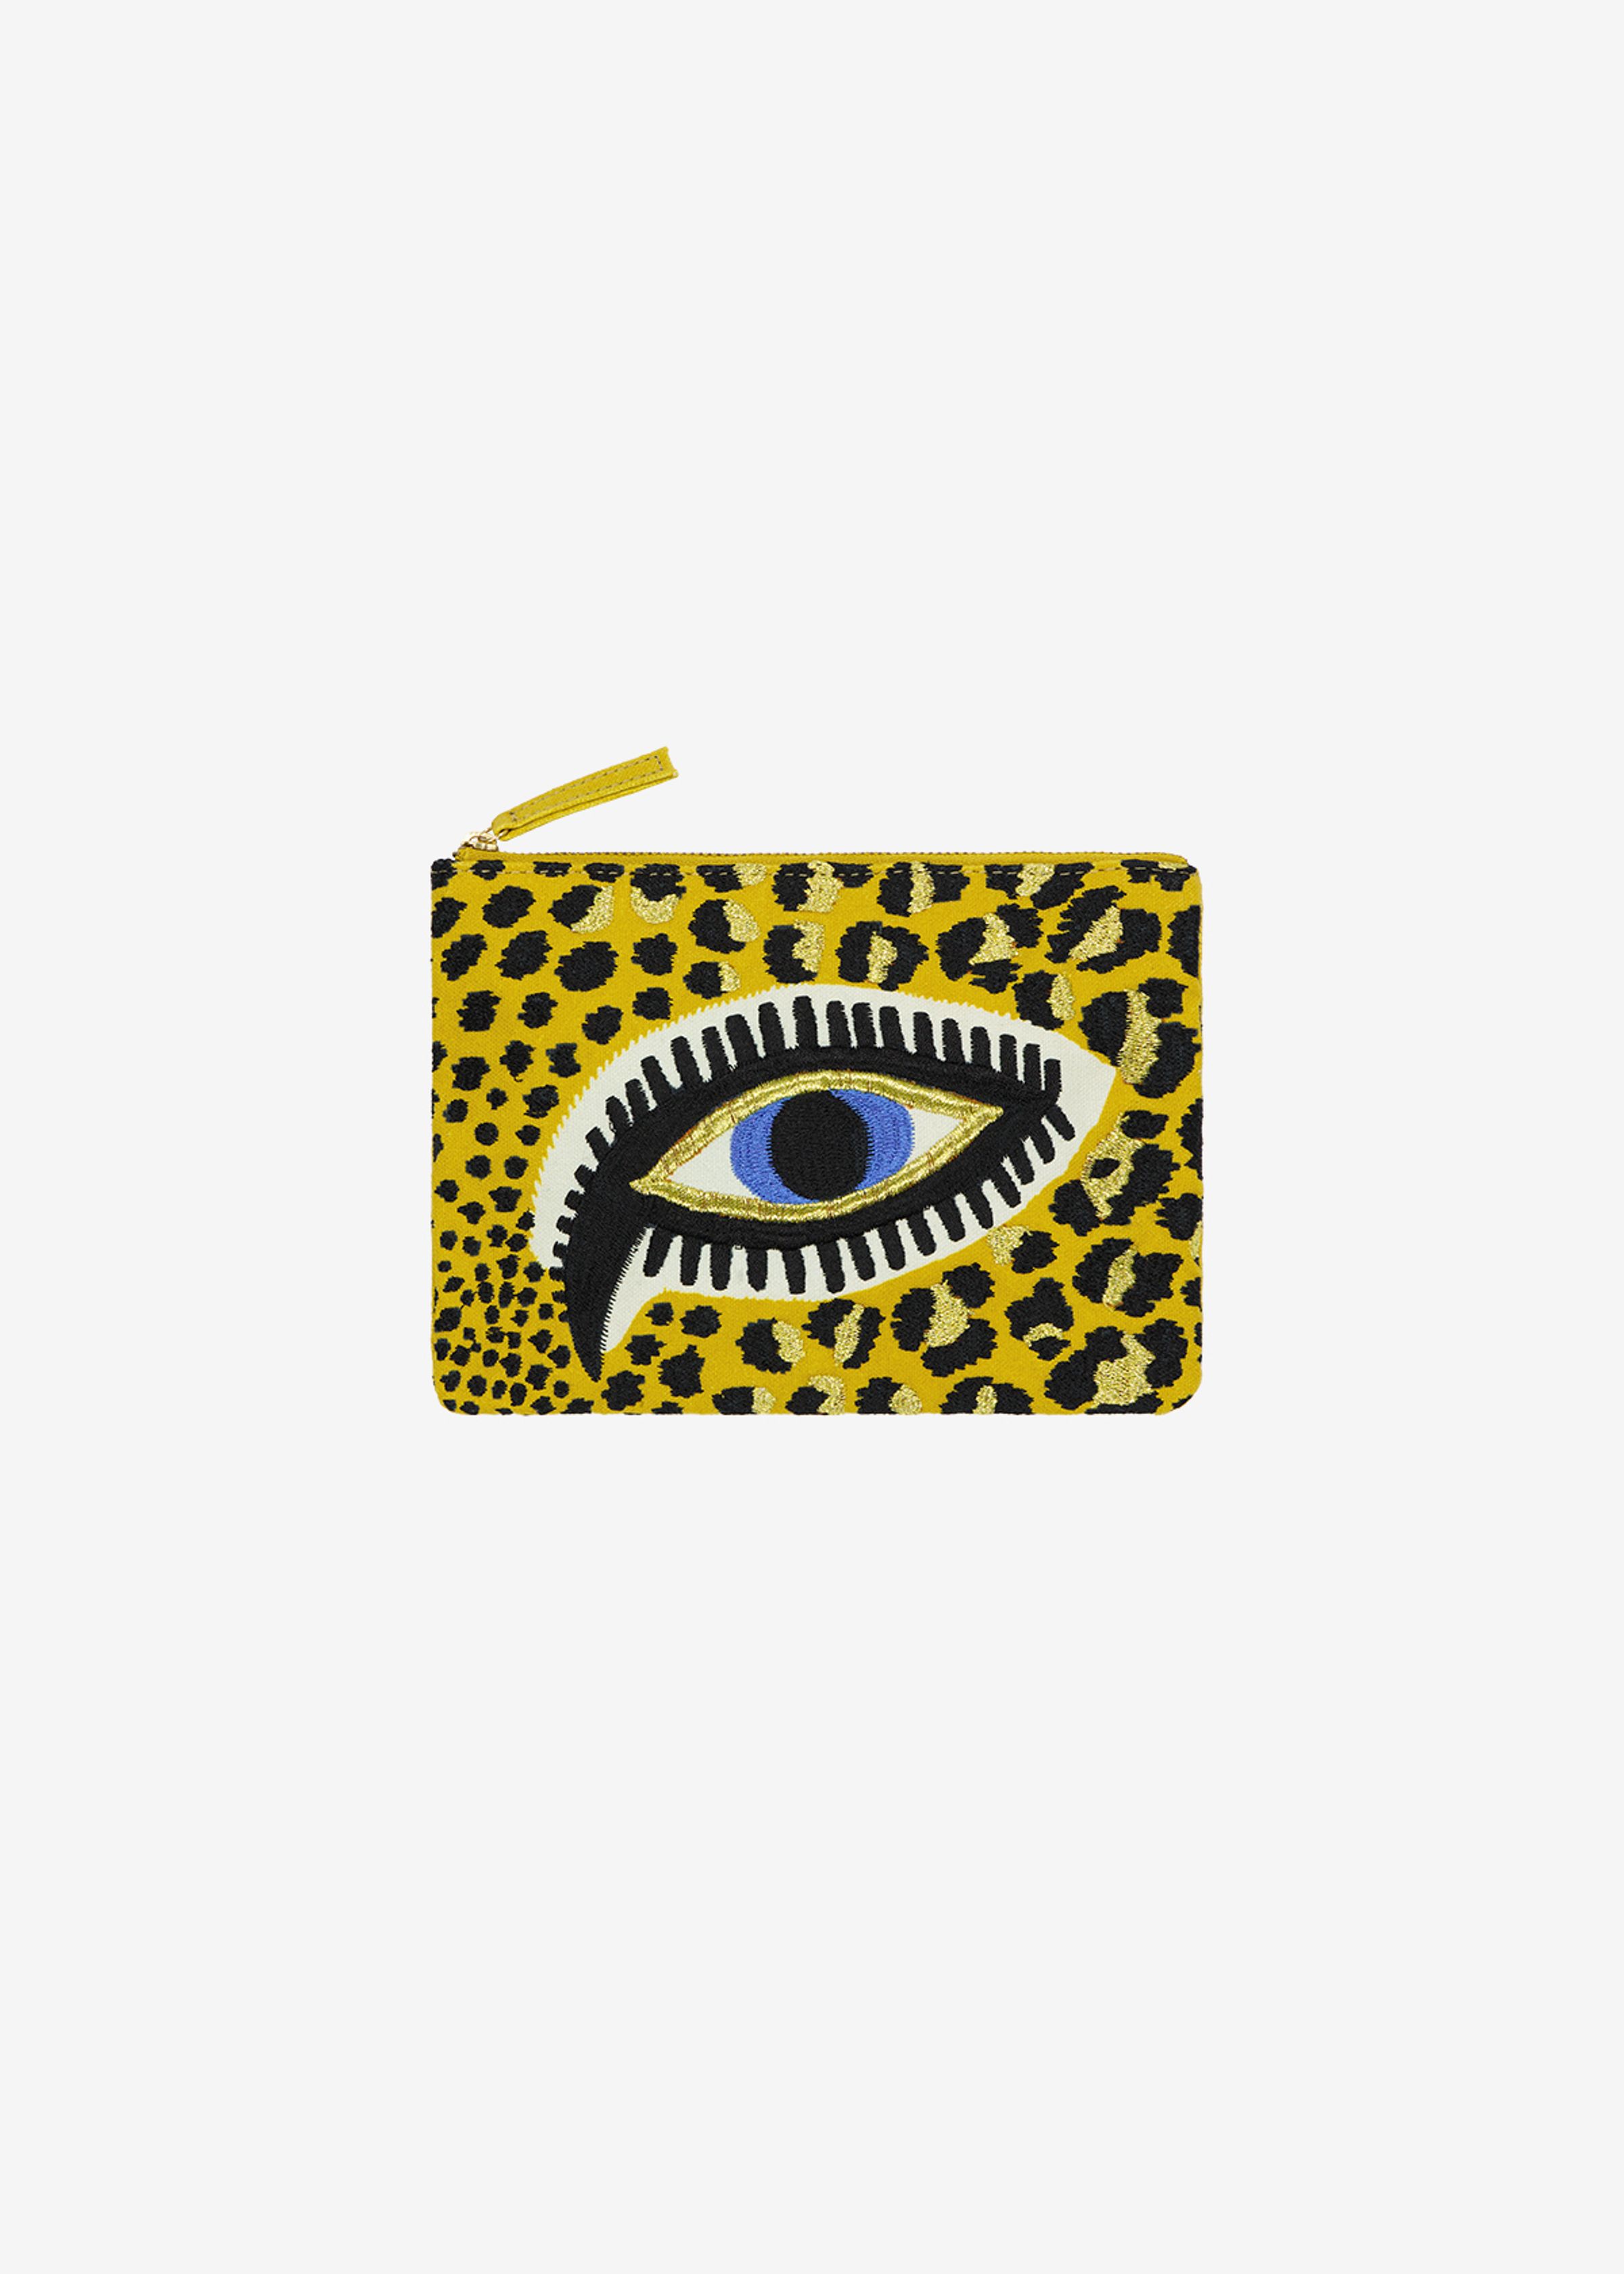 Embroidered Pouch - Leopard Eyes - Yellow